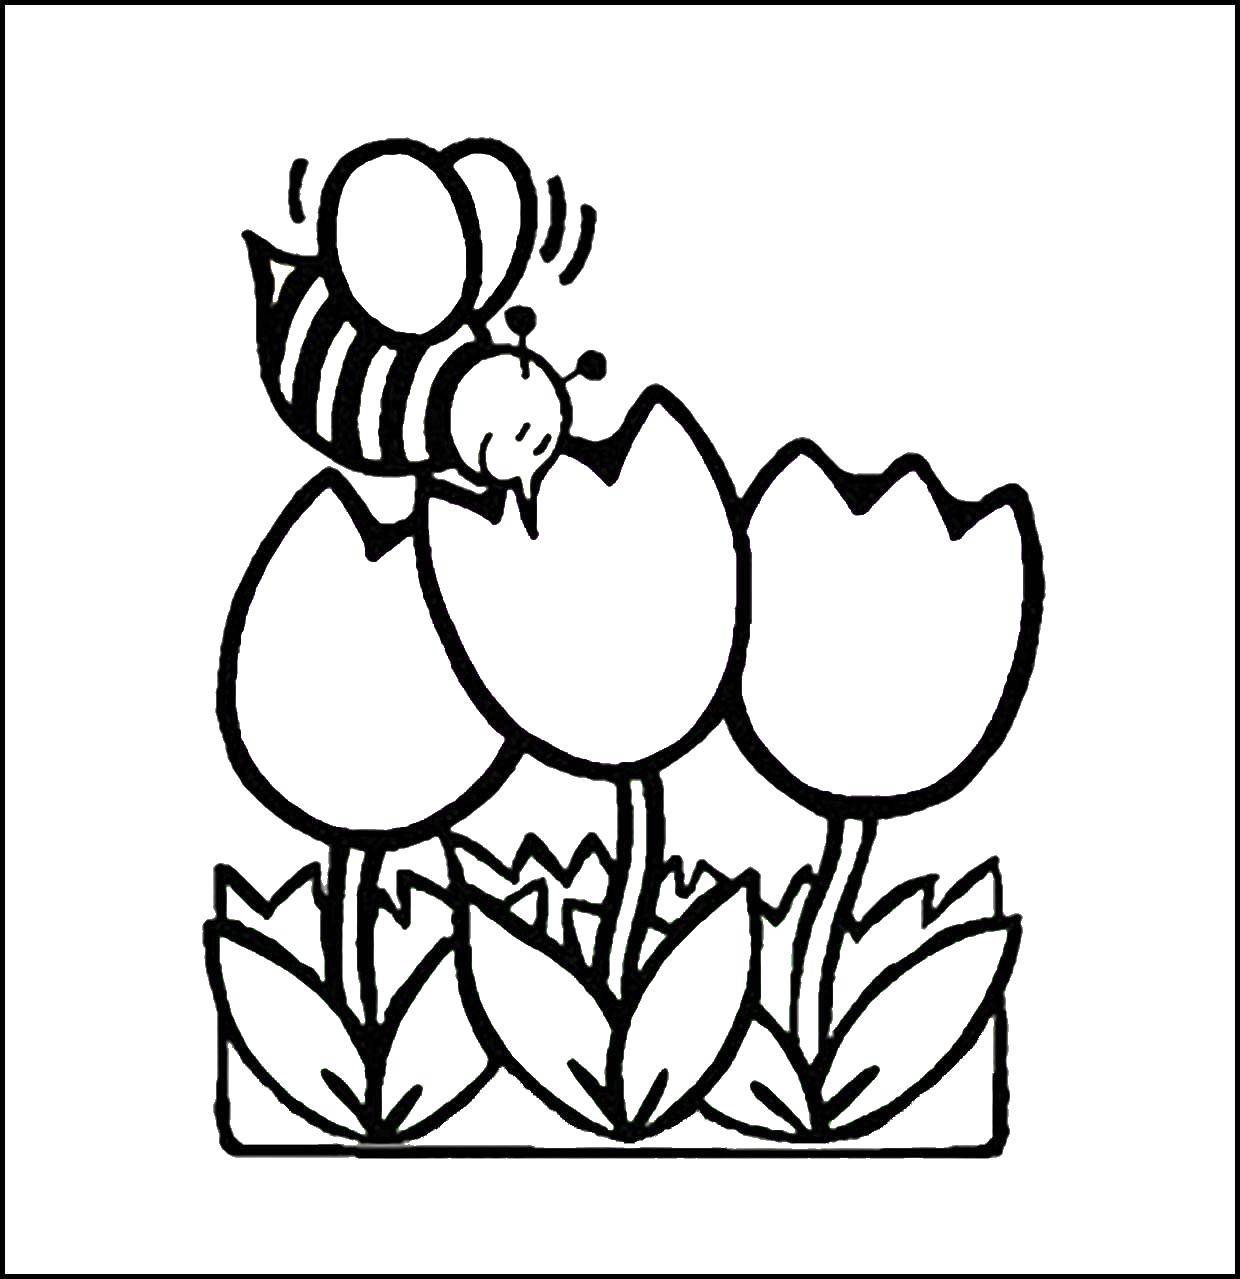 Coloring Bee on tulips. Category Coloring pages for kids. Tags:  Flowers, tulips.